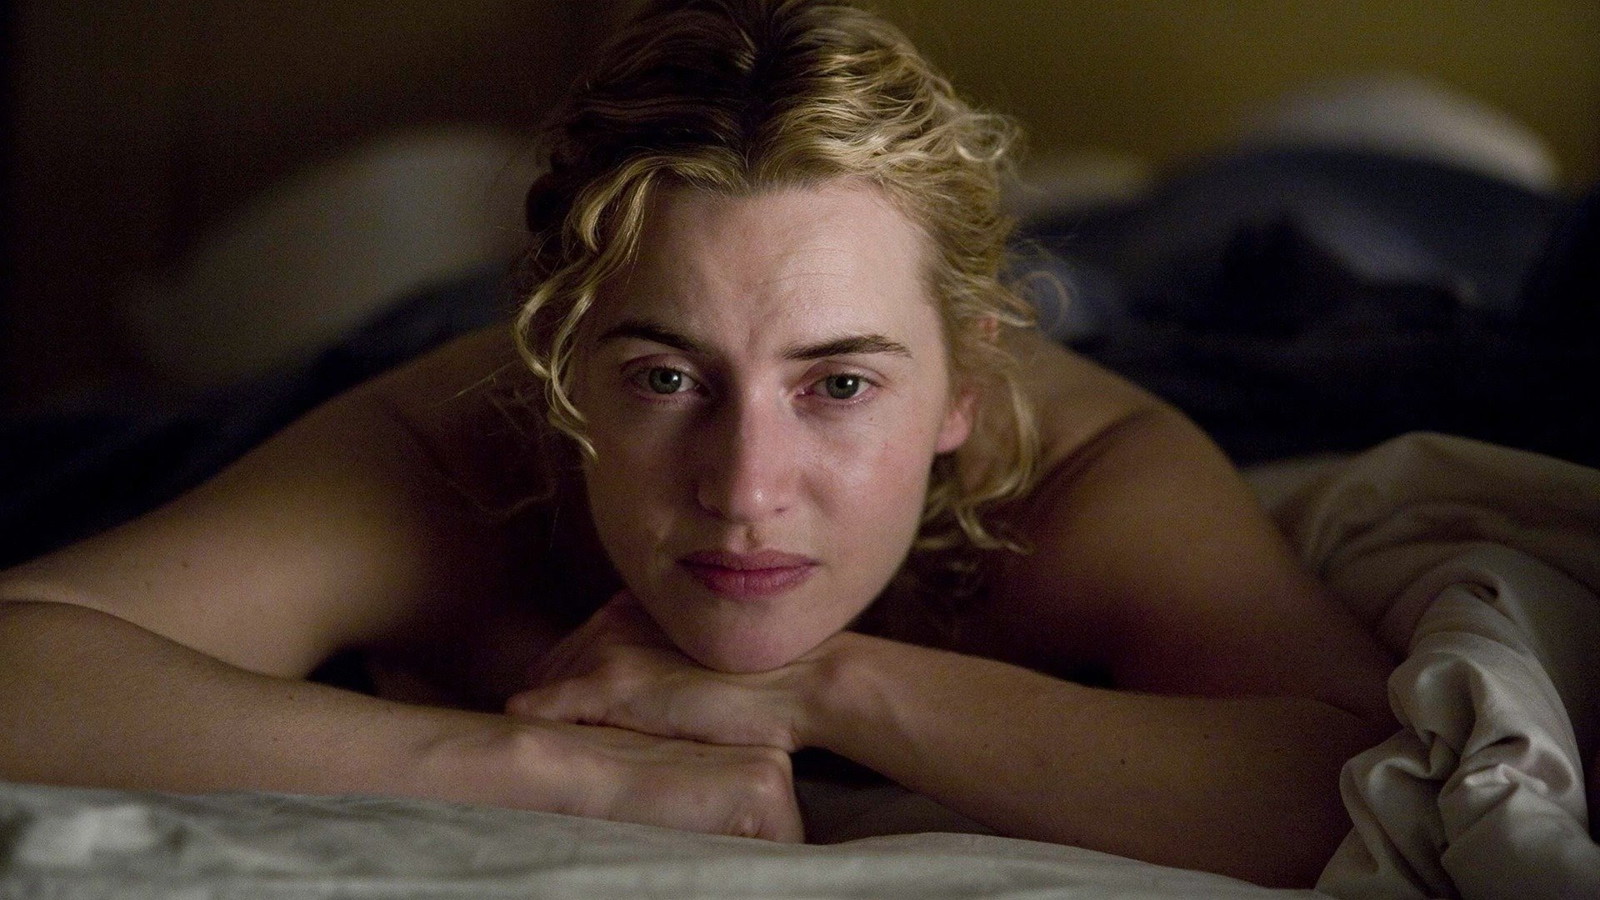 Kate Winslet won the Oscar for Best Actress for The Reader | The Weinstein Company